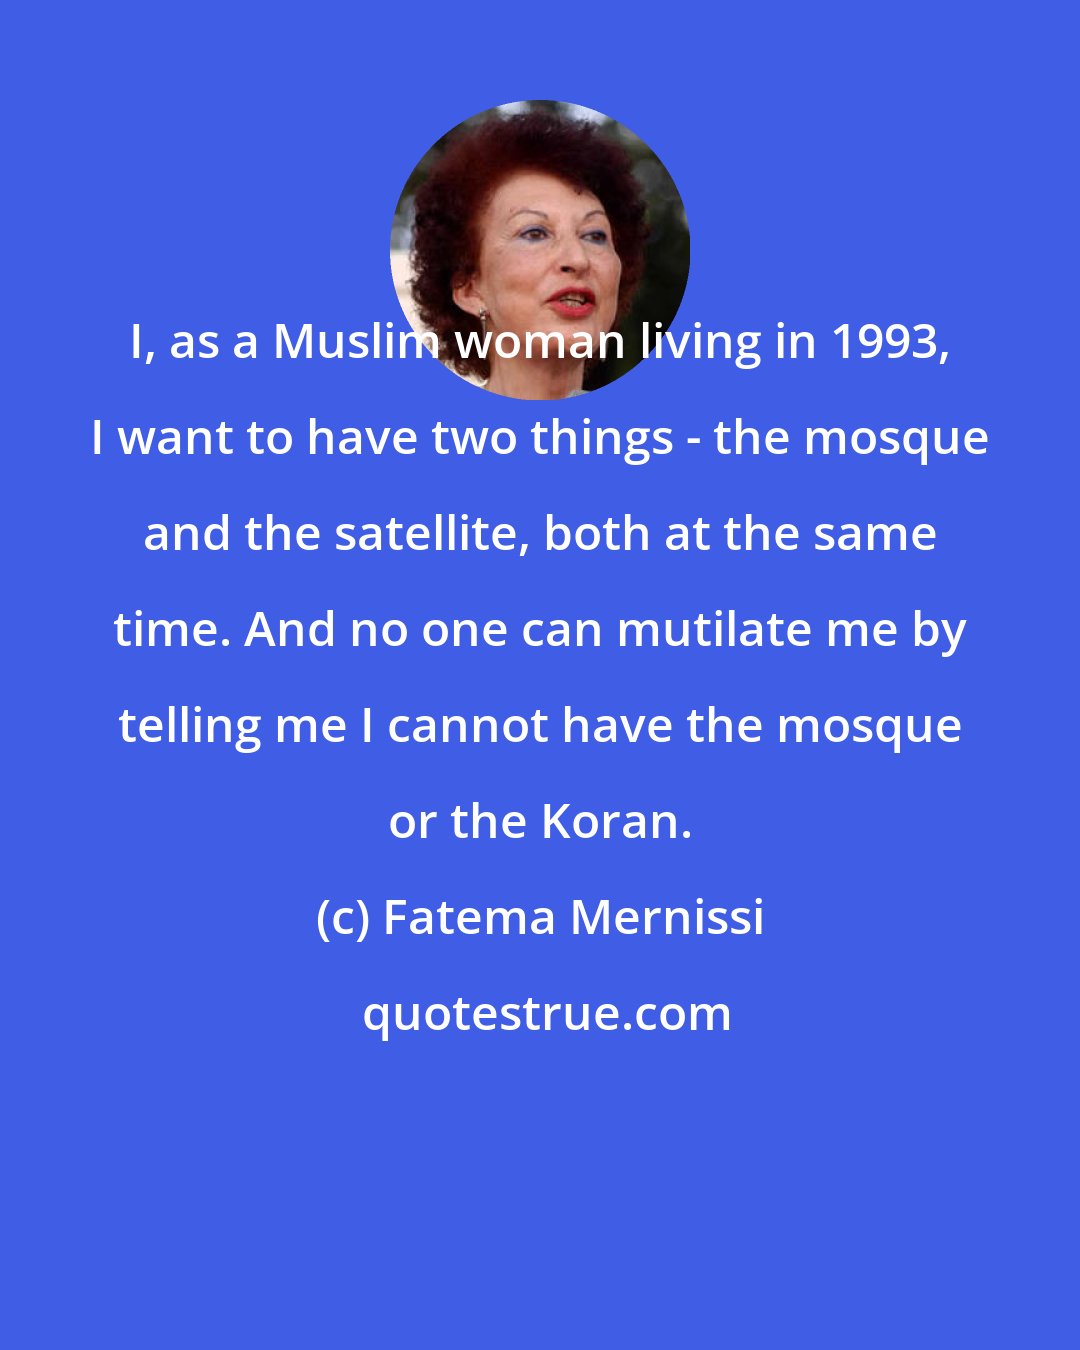 Fatema Mernissi: I, as a Muslim woman living in 1993, I want to have two things - the mosque and the satellite, both at the same time. And no one can mutilate me by telling me I cannot have the mosque or the Koran.